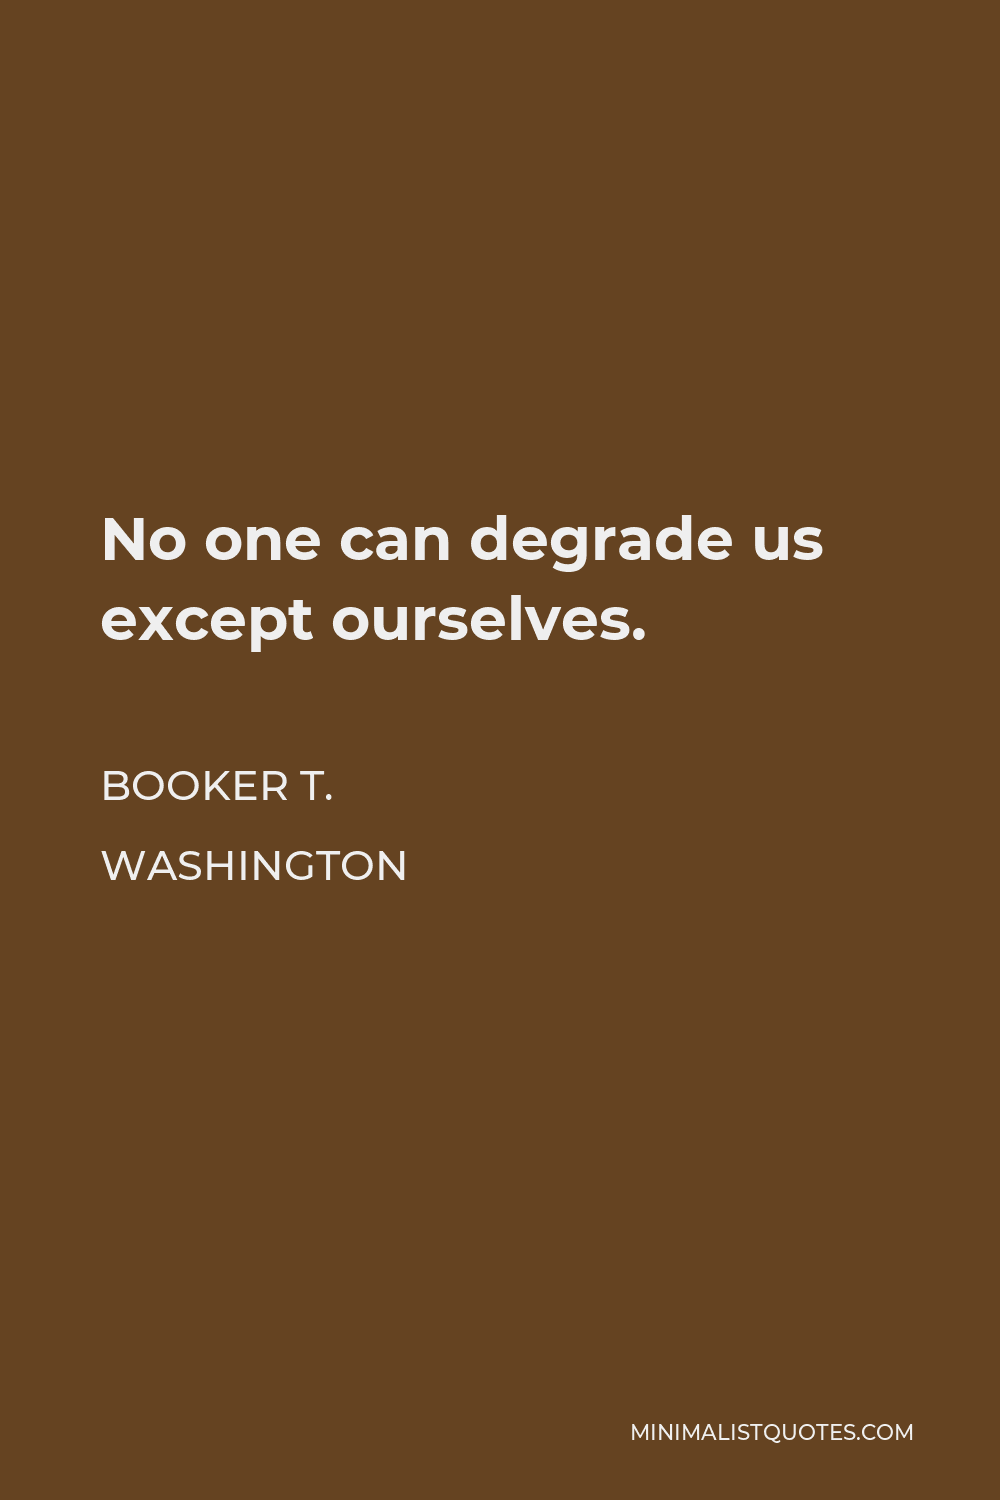 Booker T. Washington Quote - No one can degrade us except ourselves.